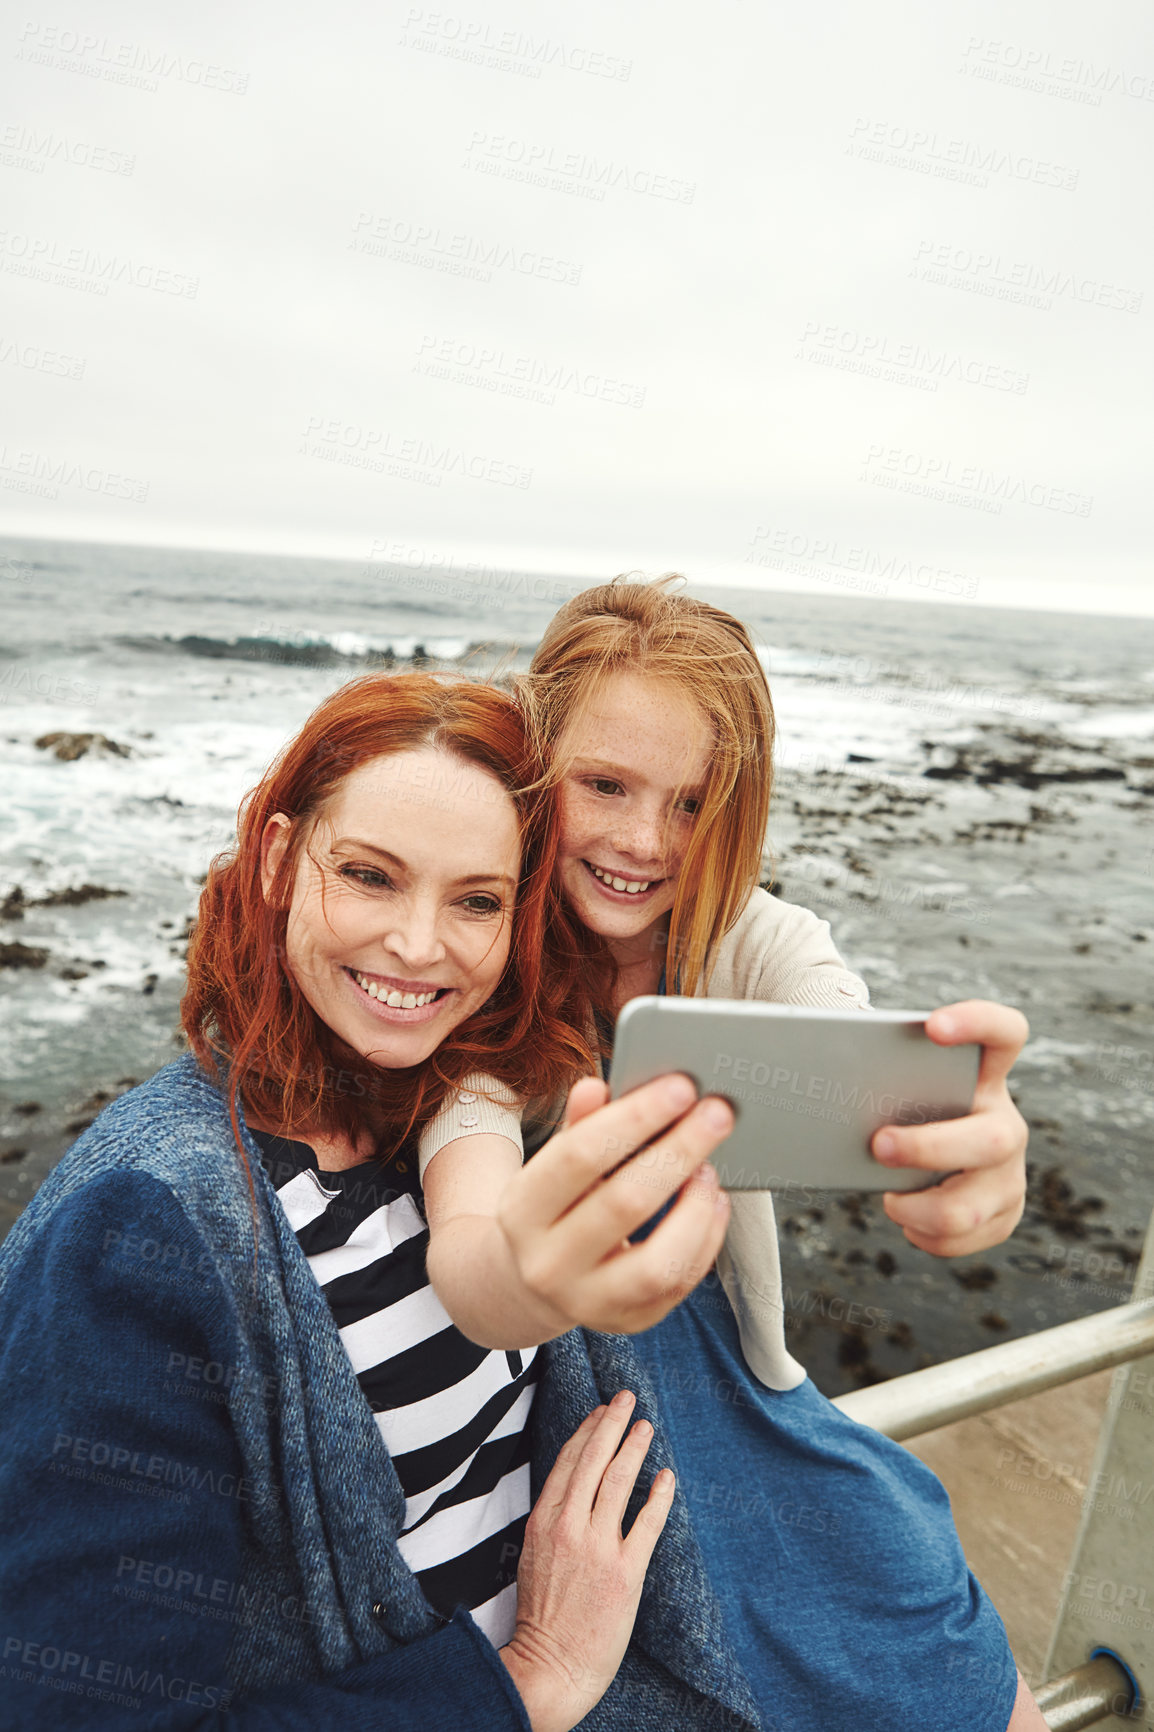 Buy stock photo Shot of a mother and her young daughter taking a selfie at the waterfront